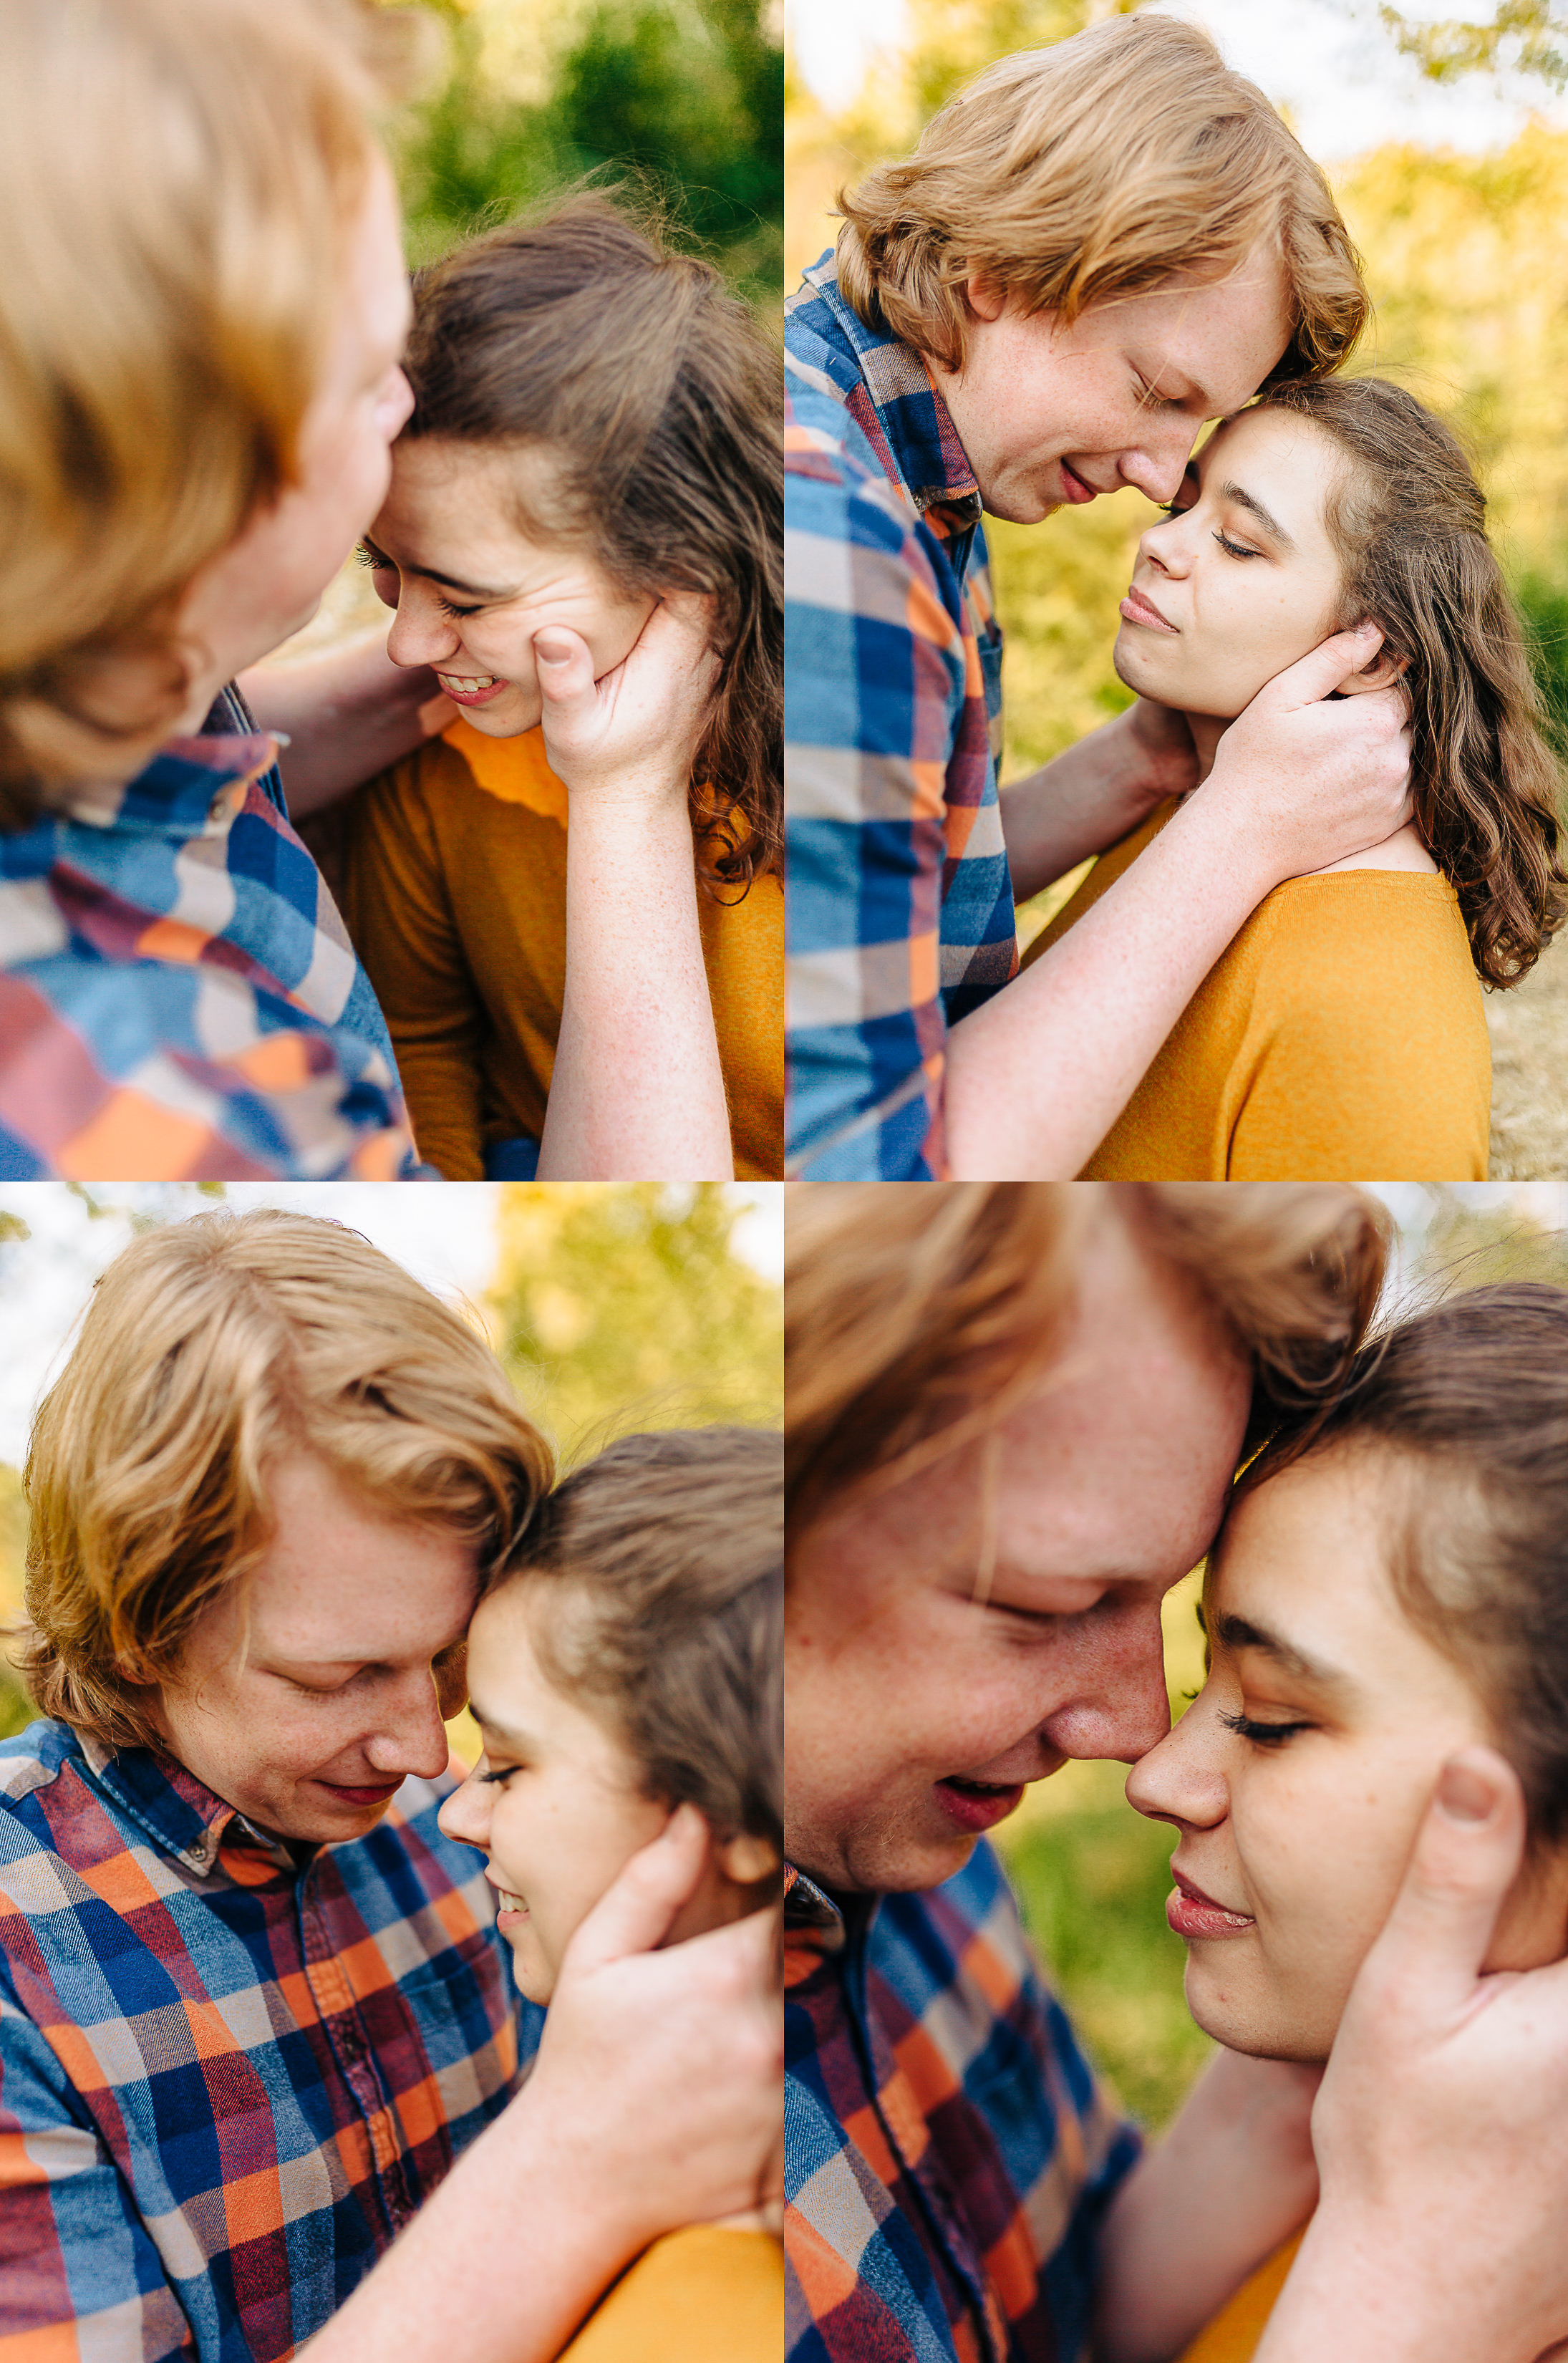 golden hour engagement photos holding her face and nuzzling noses